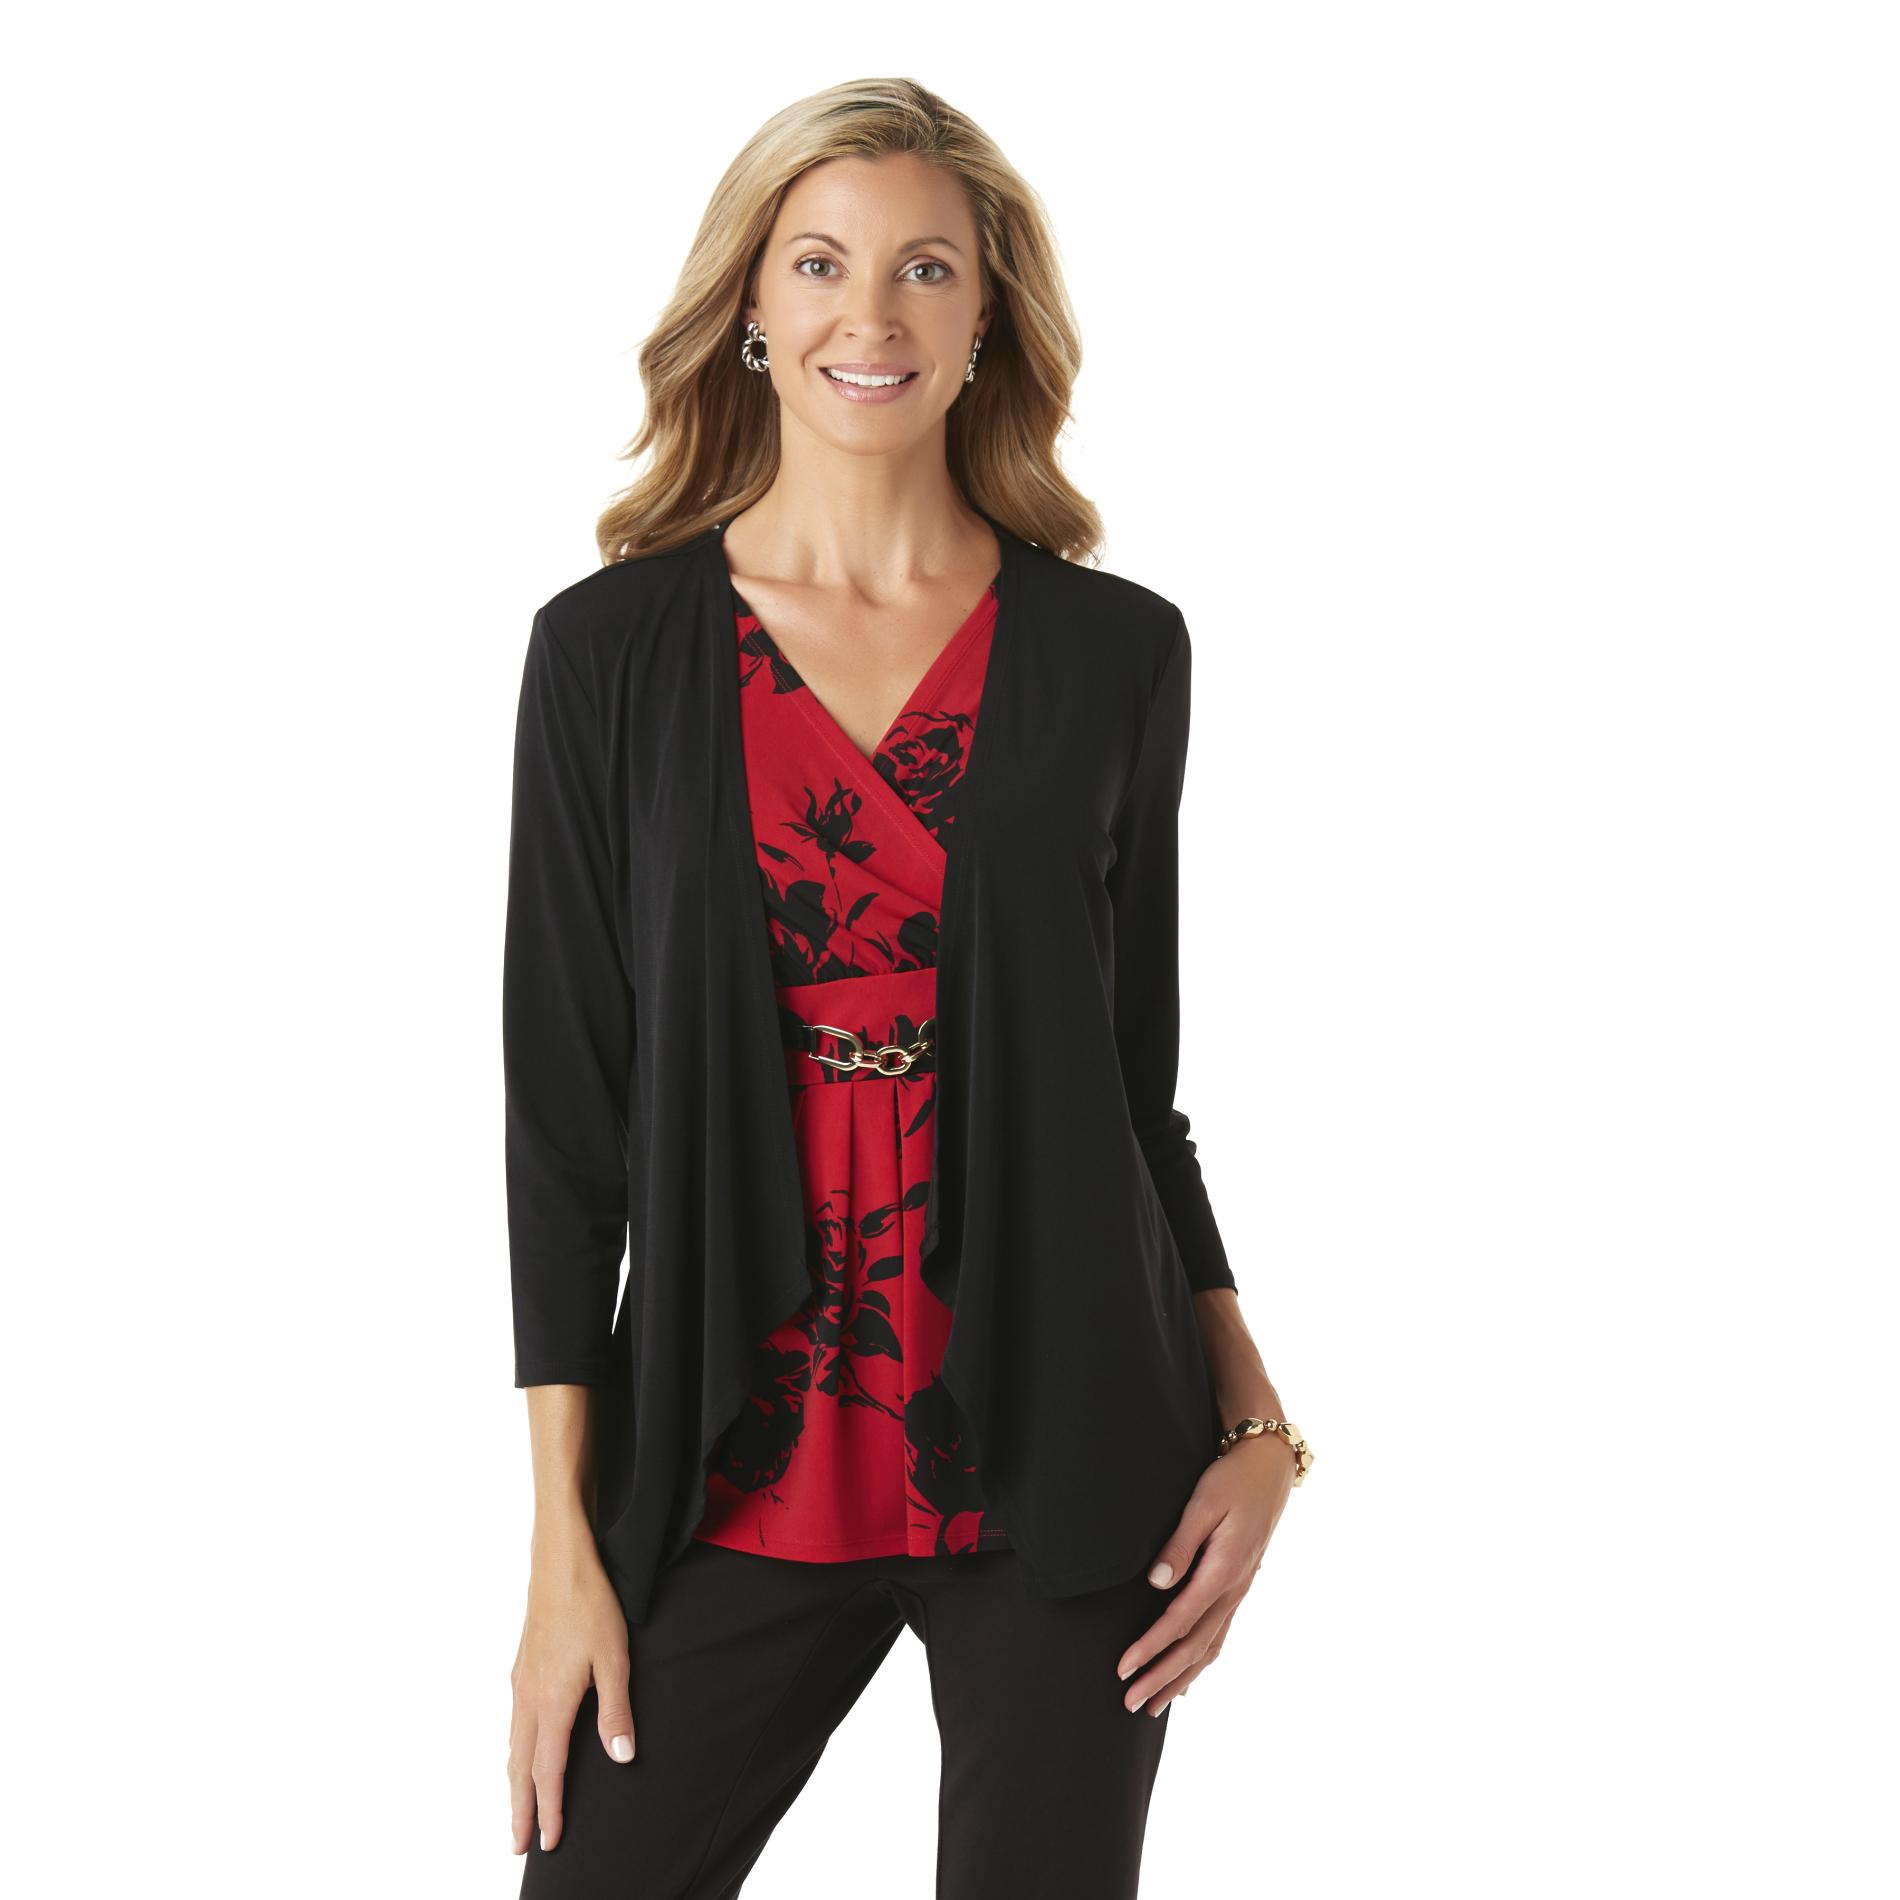 Jaclyn Smith Women's Layered-Look Top - Floral